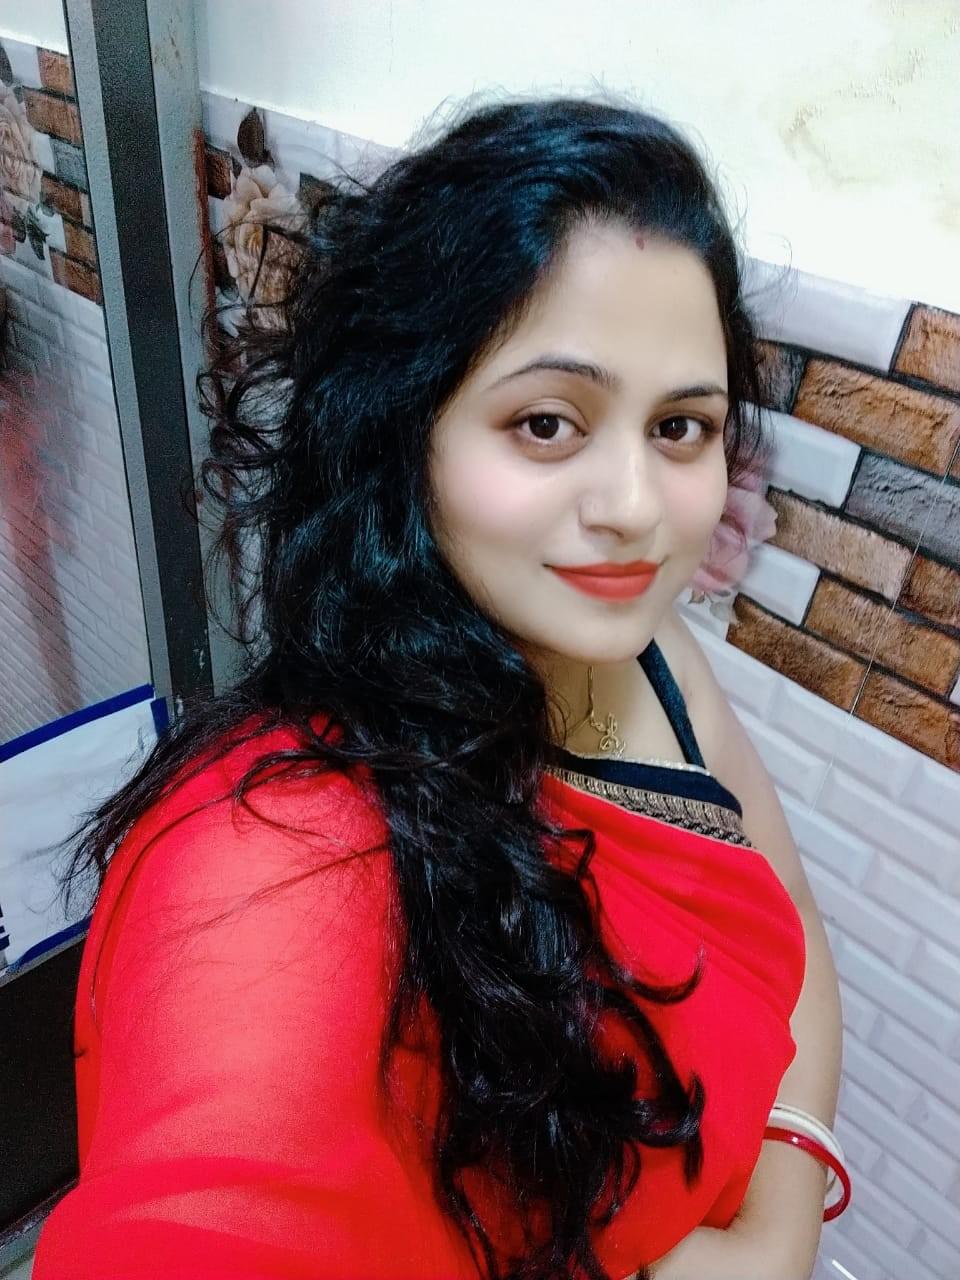 Banglore.....My self Divya Sing 👉..... today low price service available 🌟🌟🌟